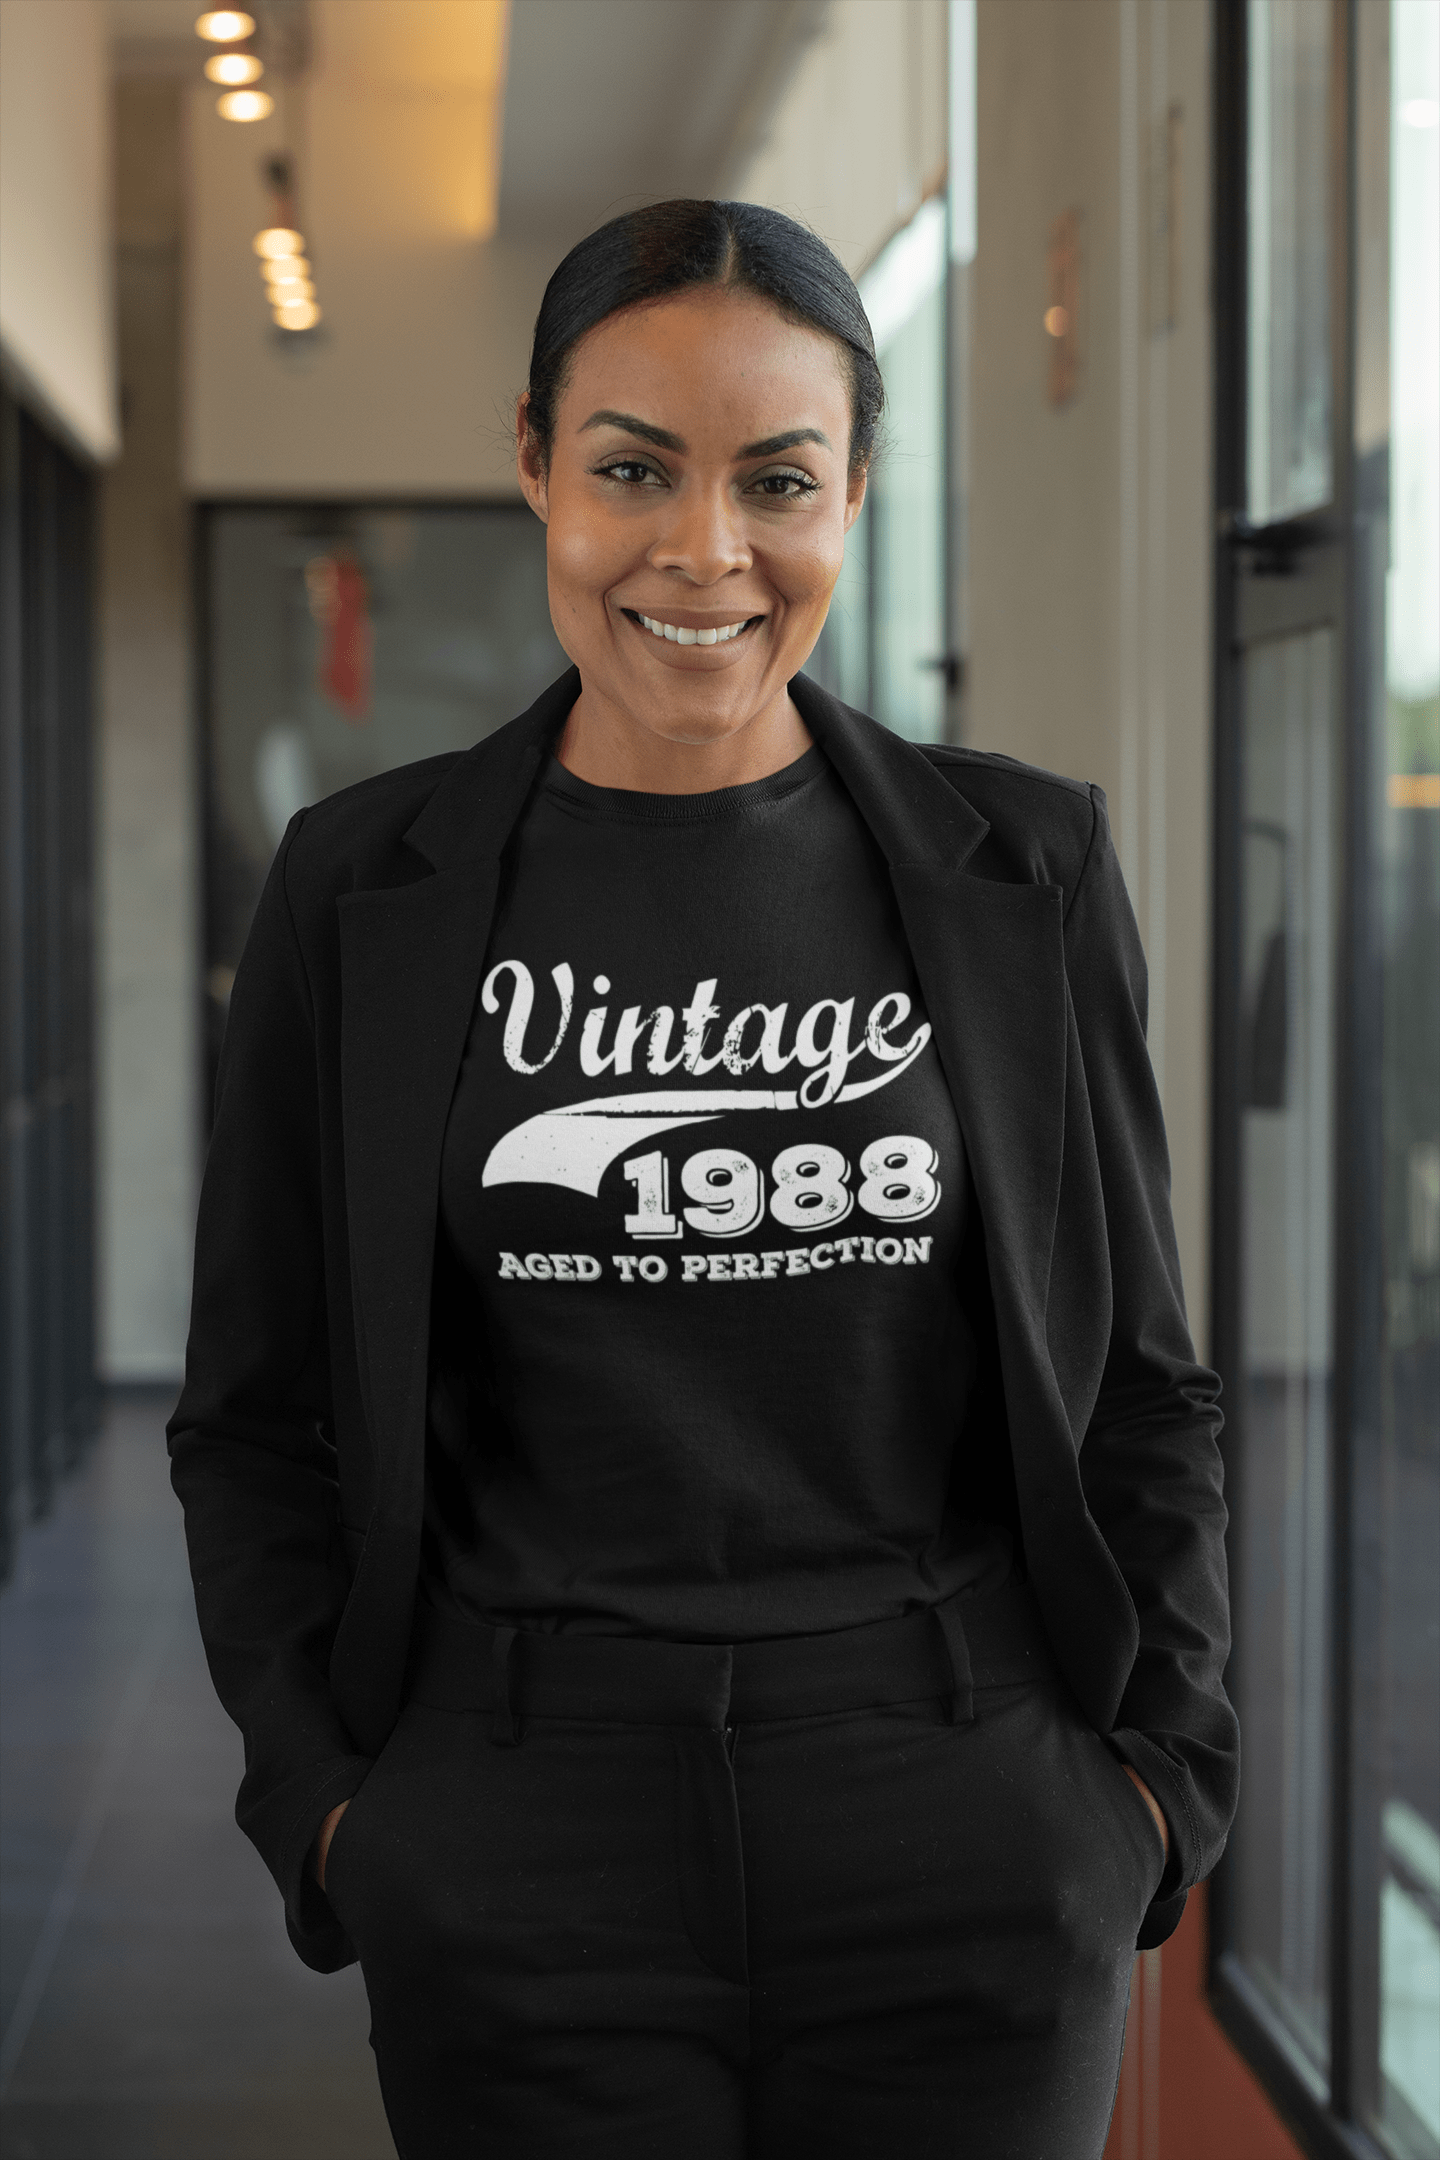 Vintage Aged to Perfection 1988, Black, Women's Short Sleeve Round Neck T-shirt, gift t-shirt 00345